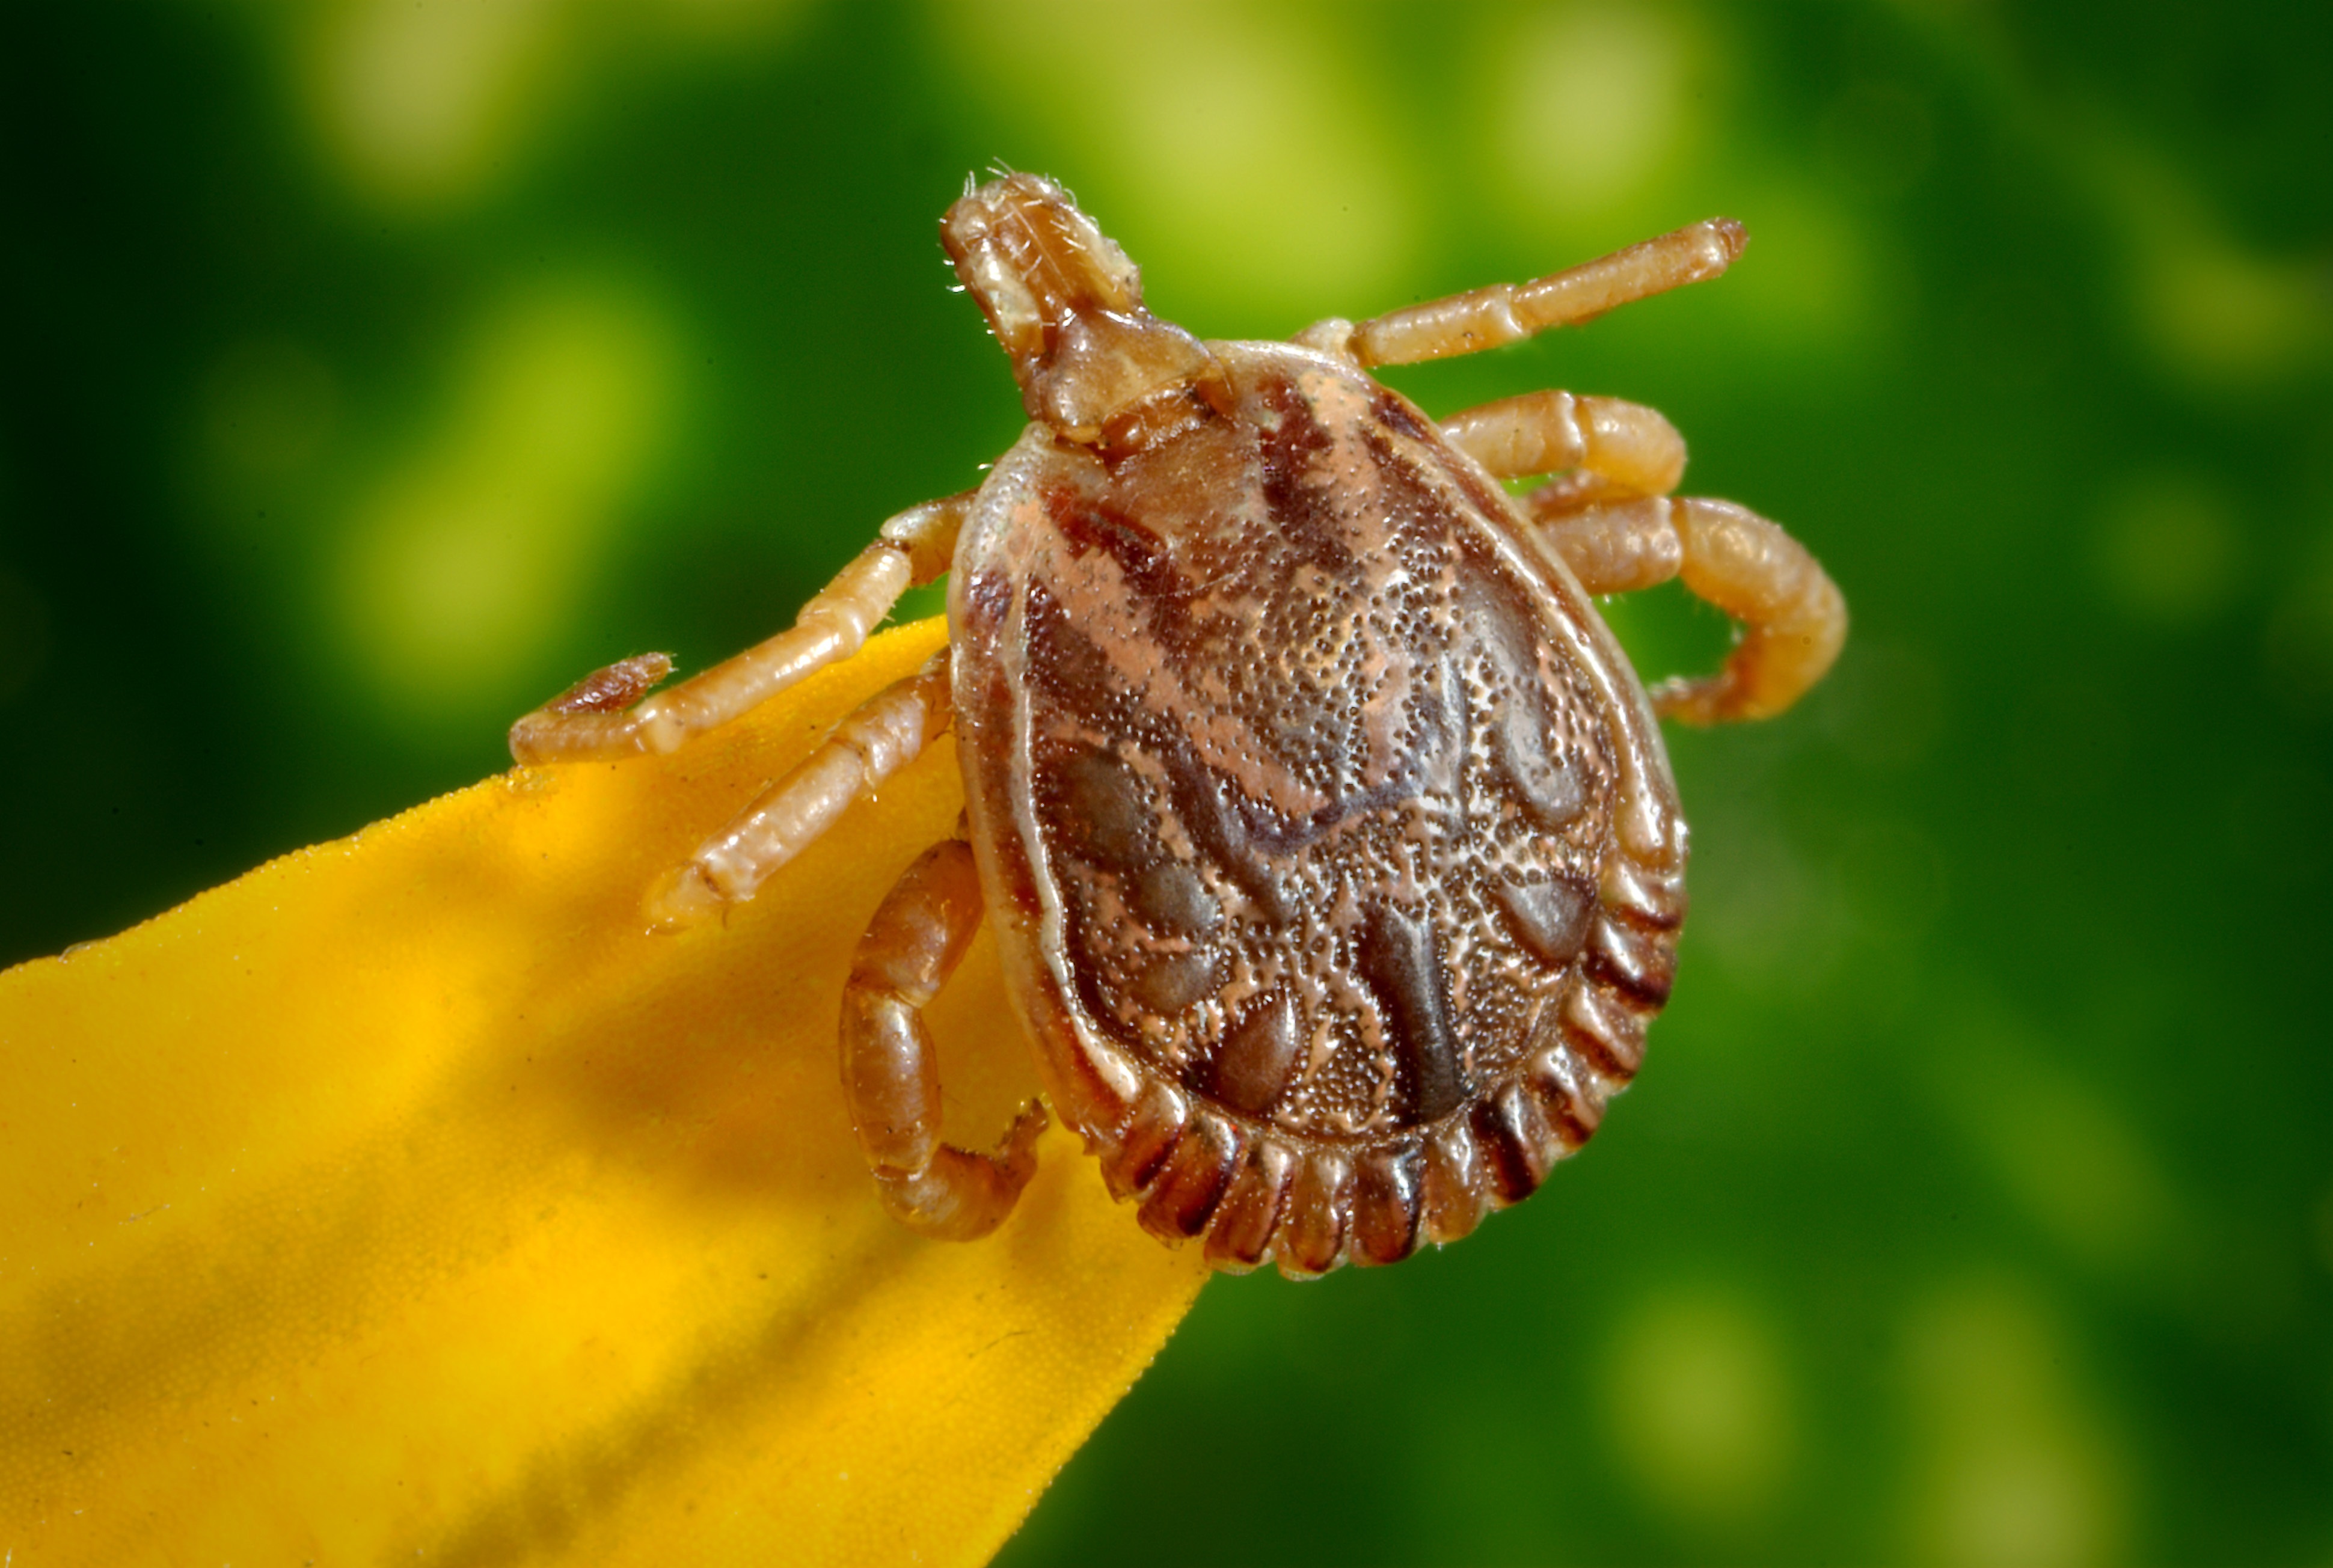 Tick-Safe Strategies for Outdoor Activities in NH, 6:30pm